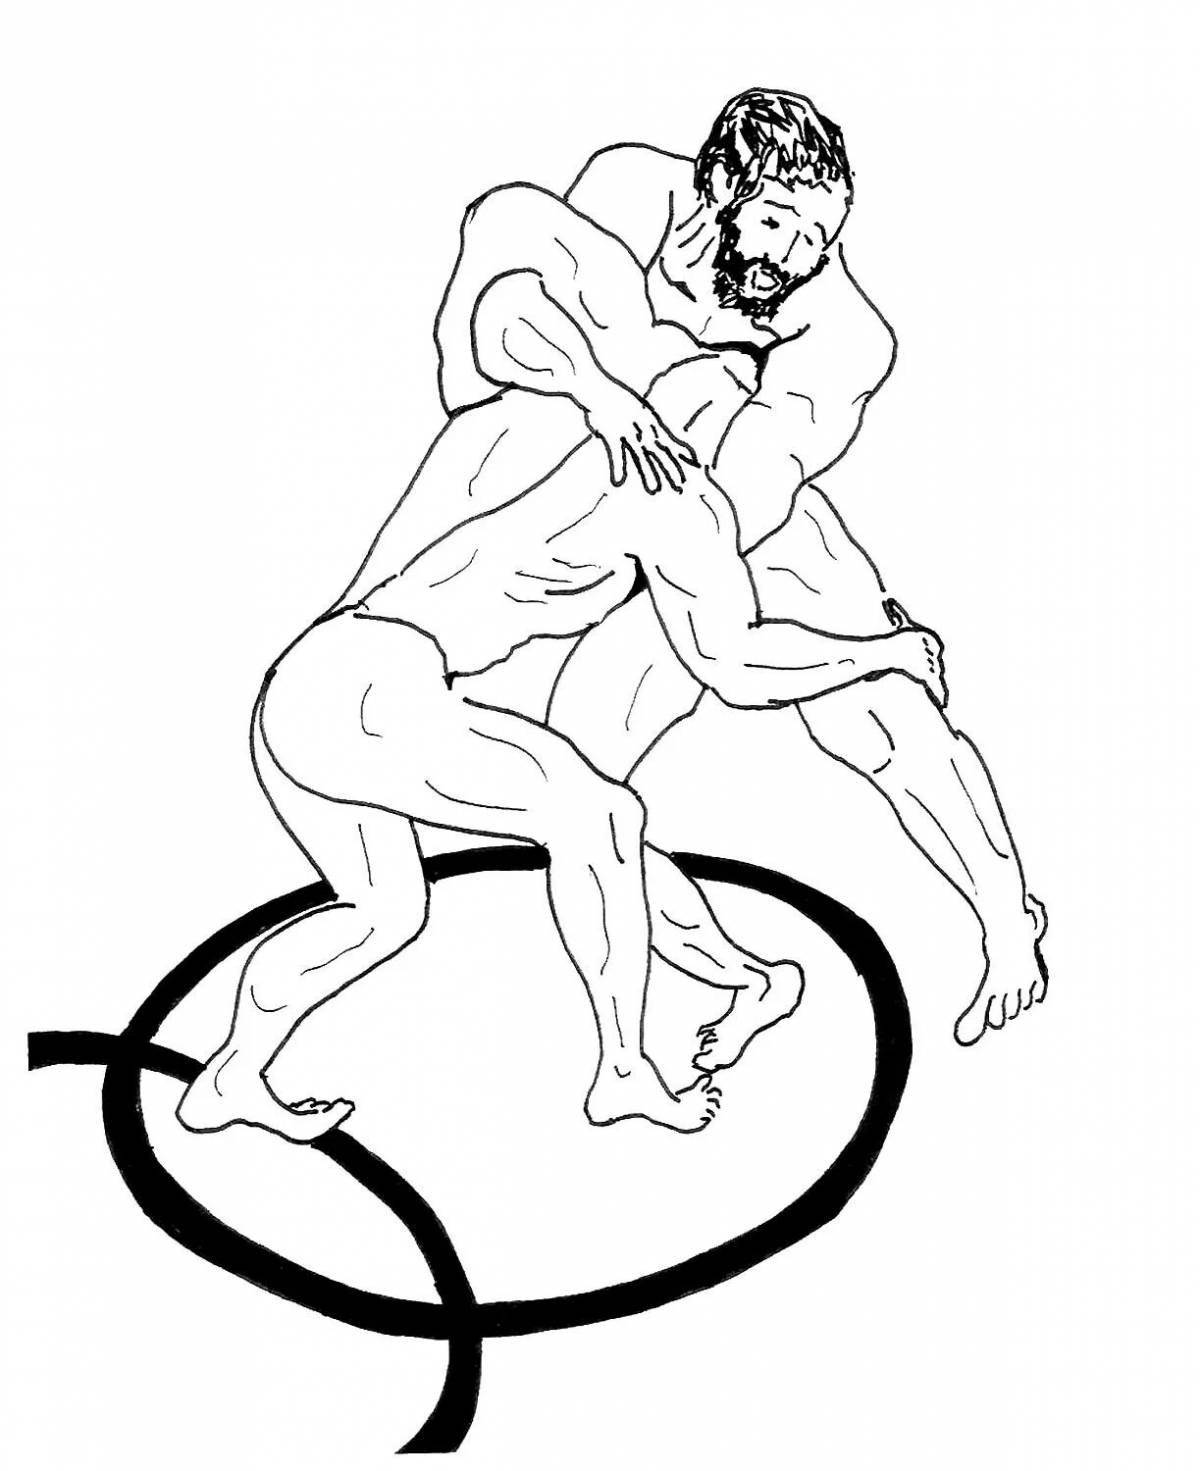 Intensive wrestler coloring pages